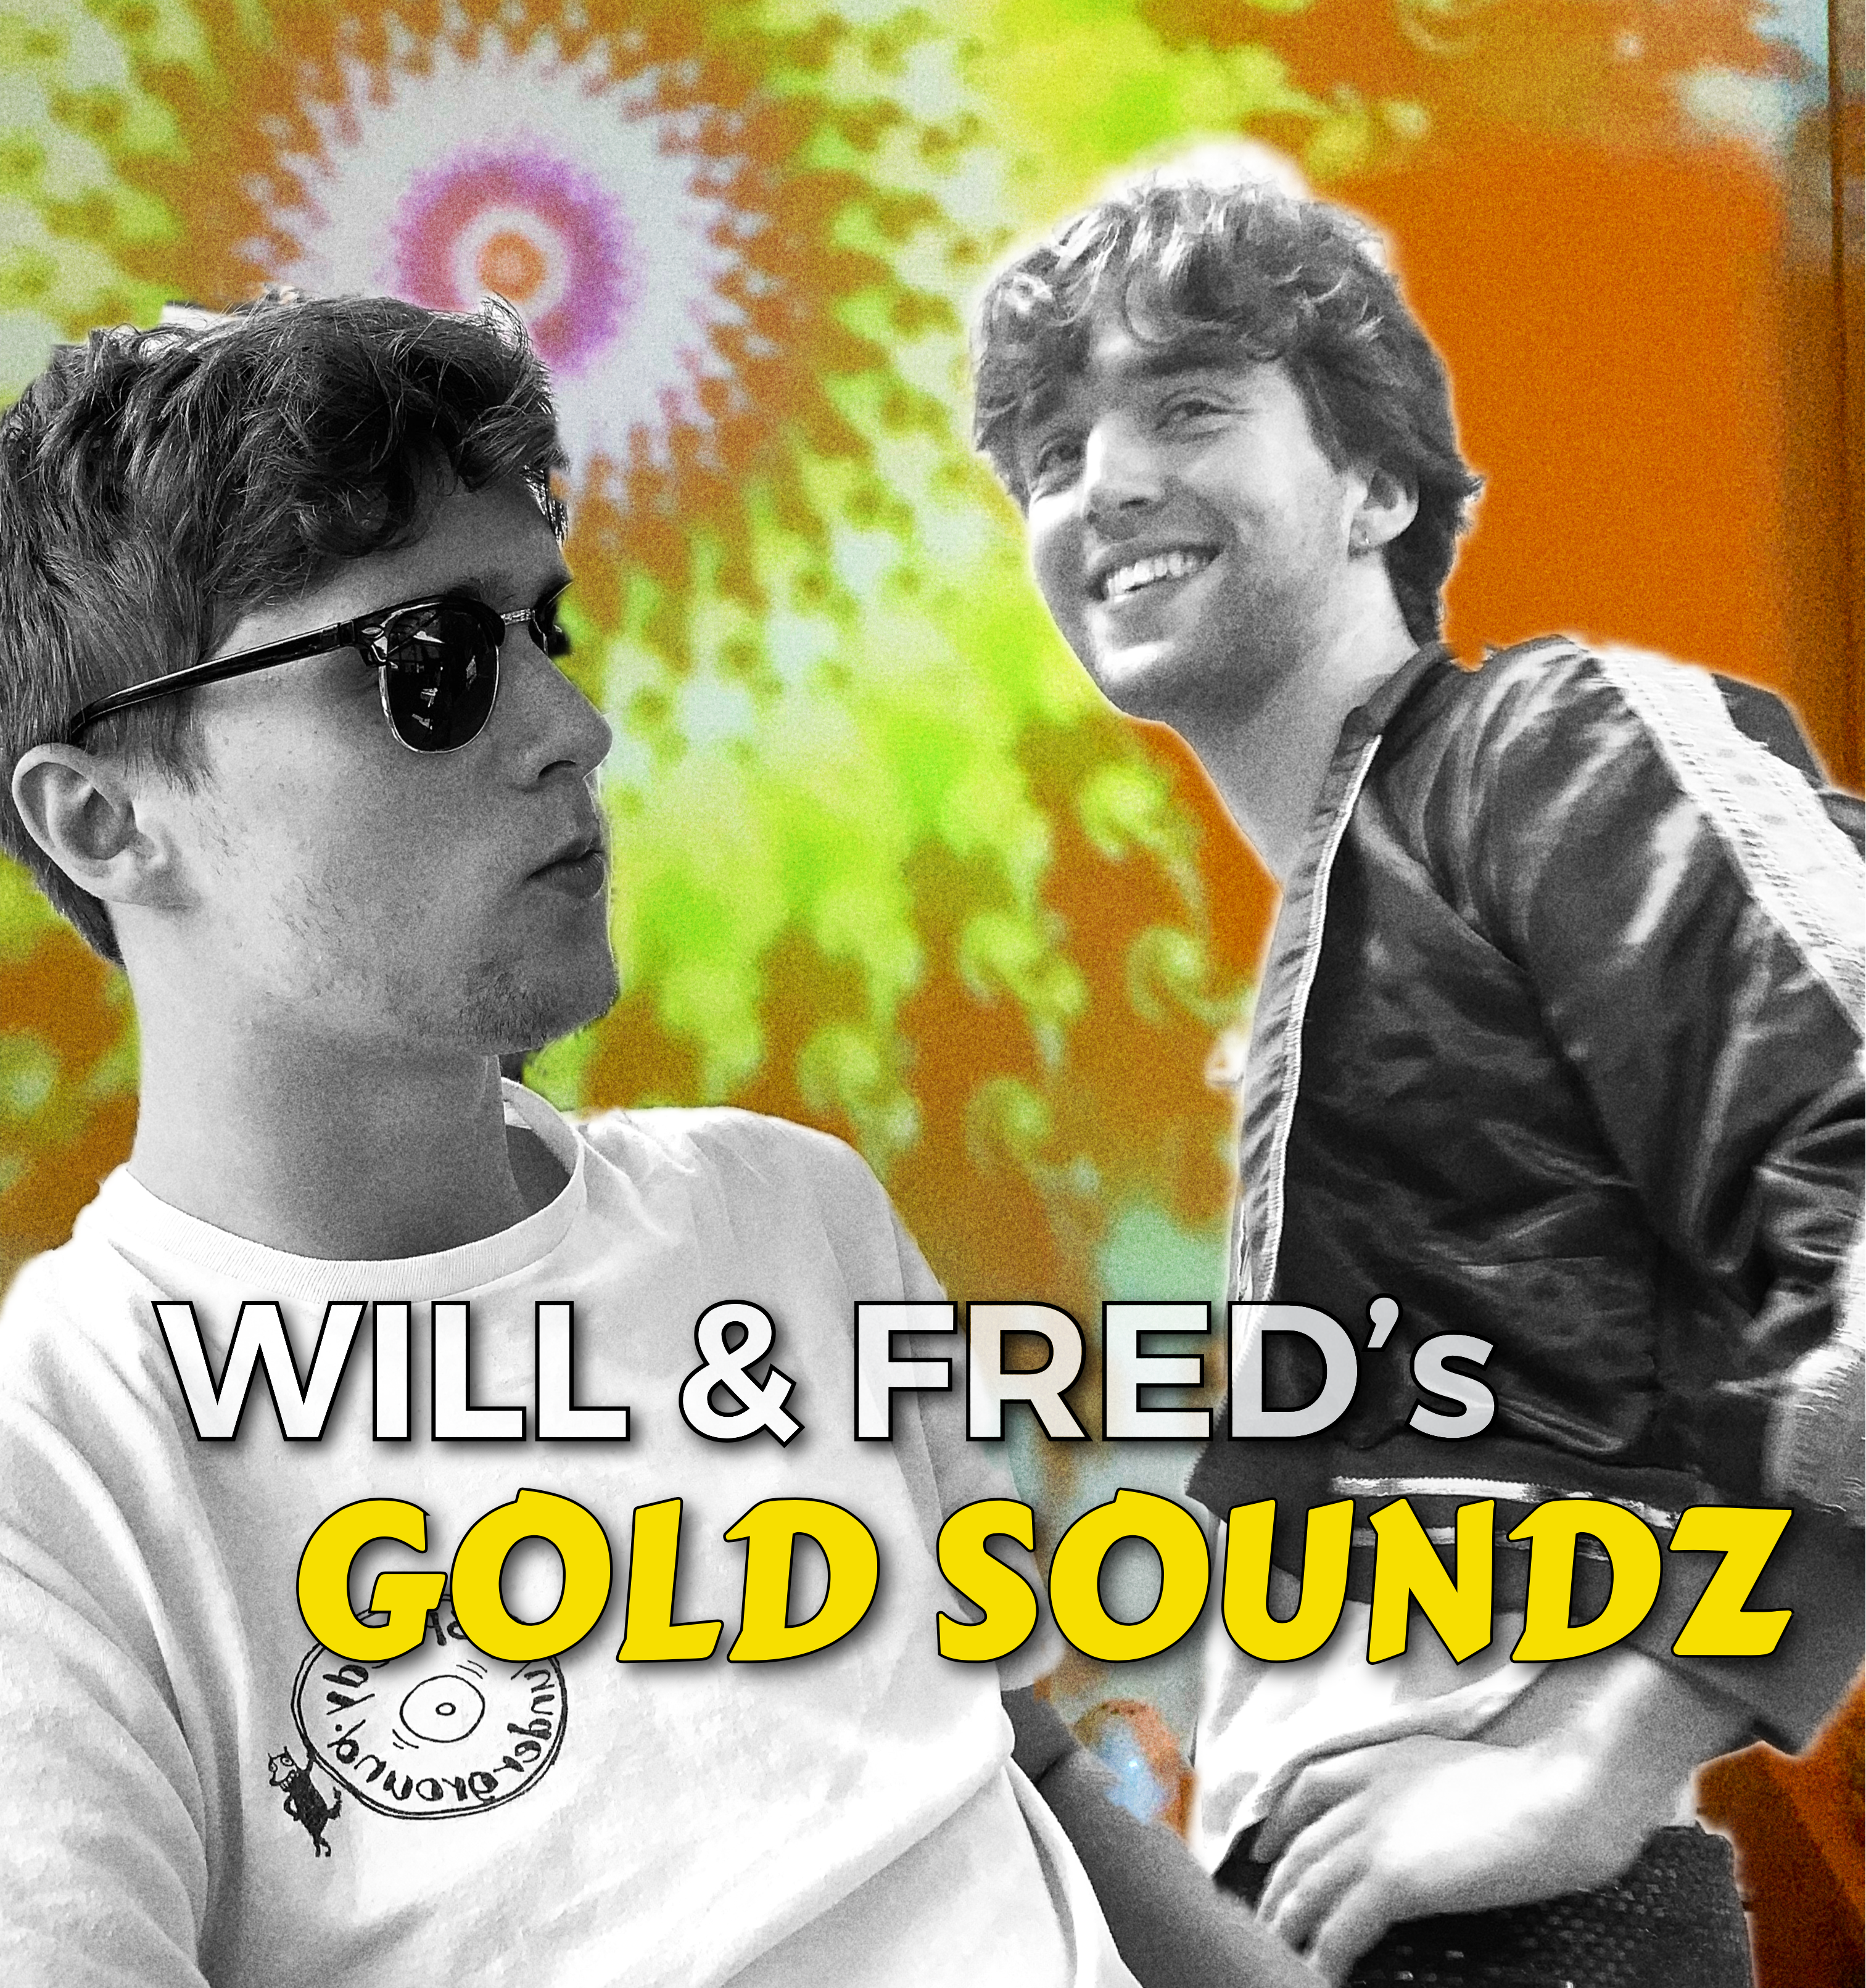 Will & Fred’s Gold Soundz Logo